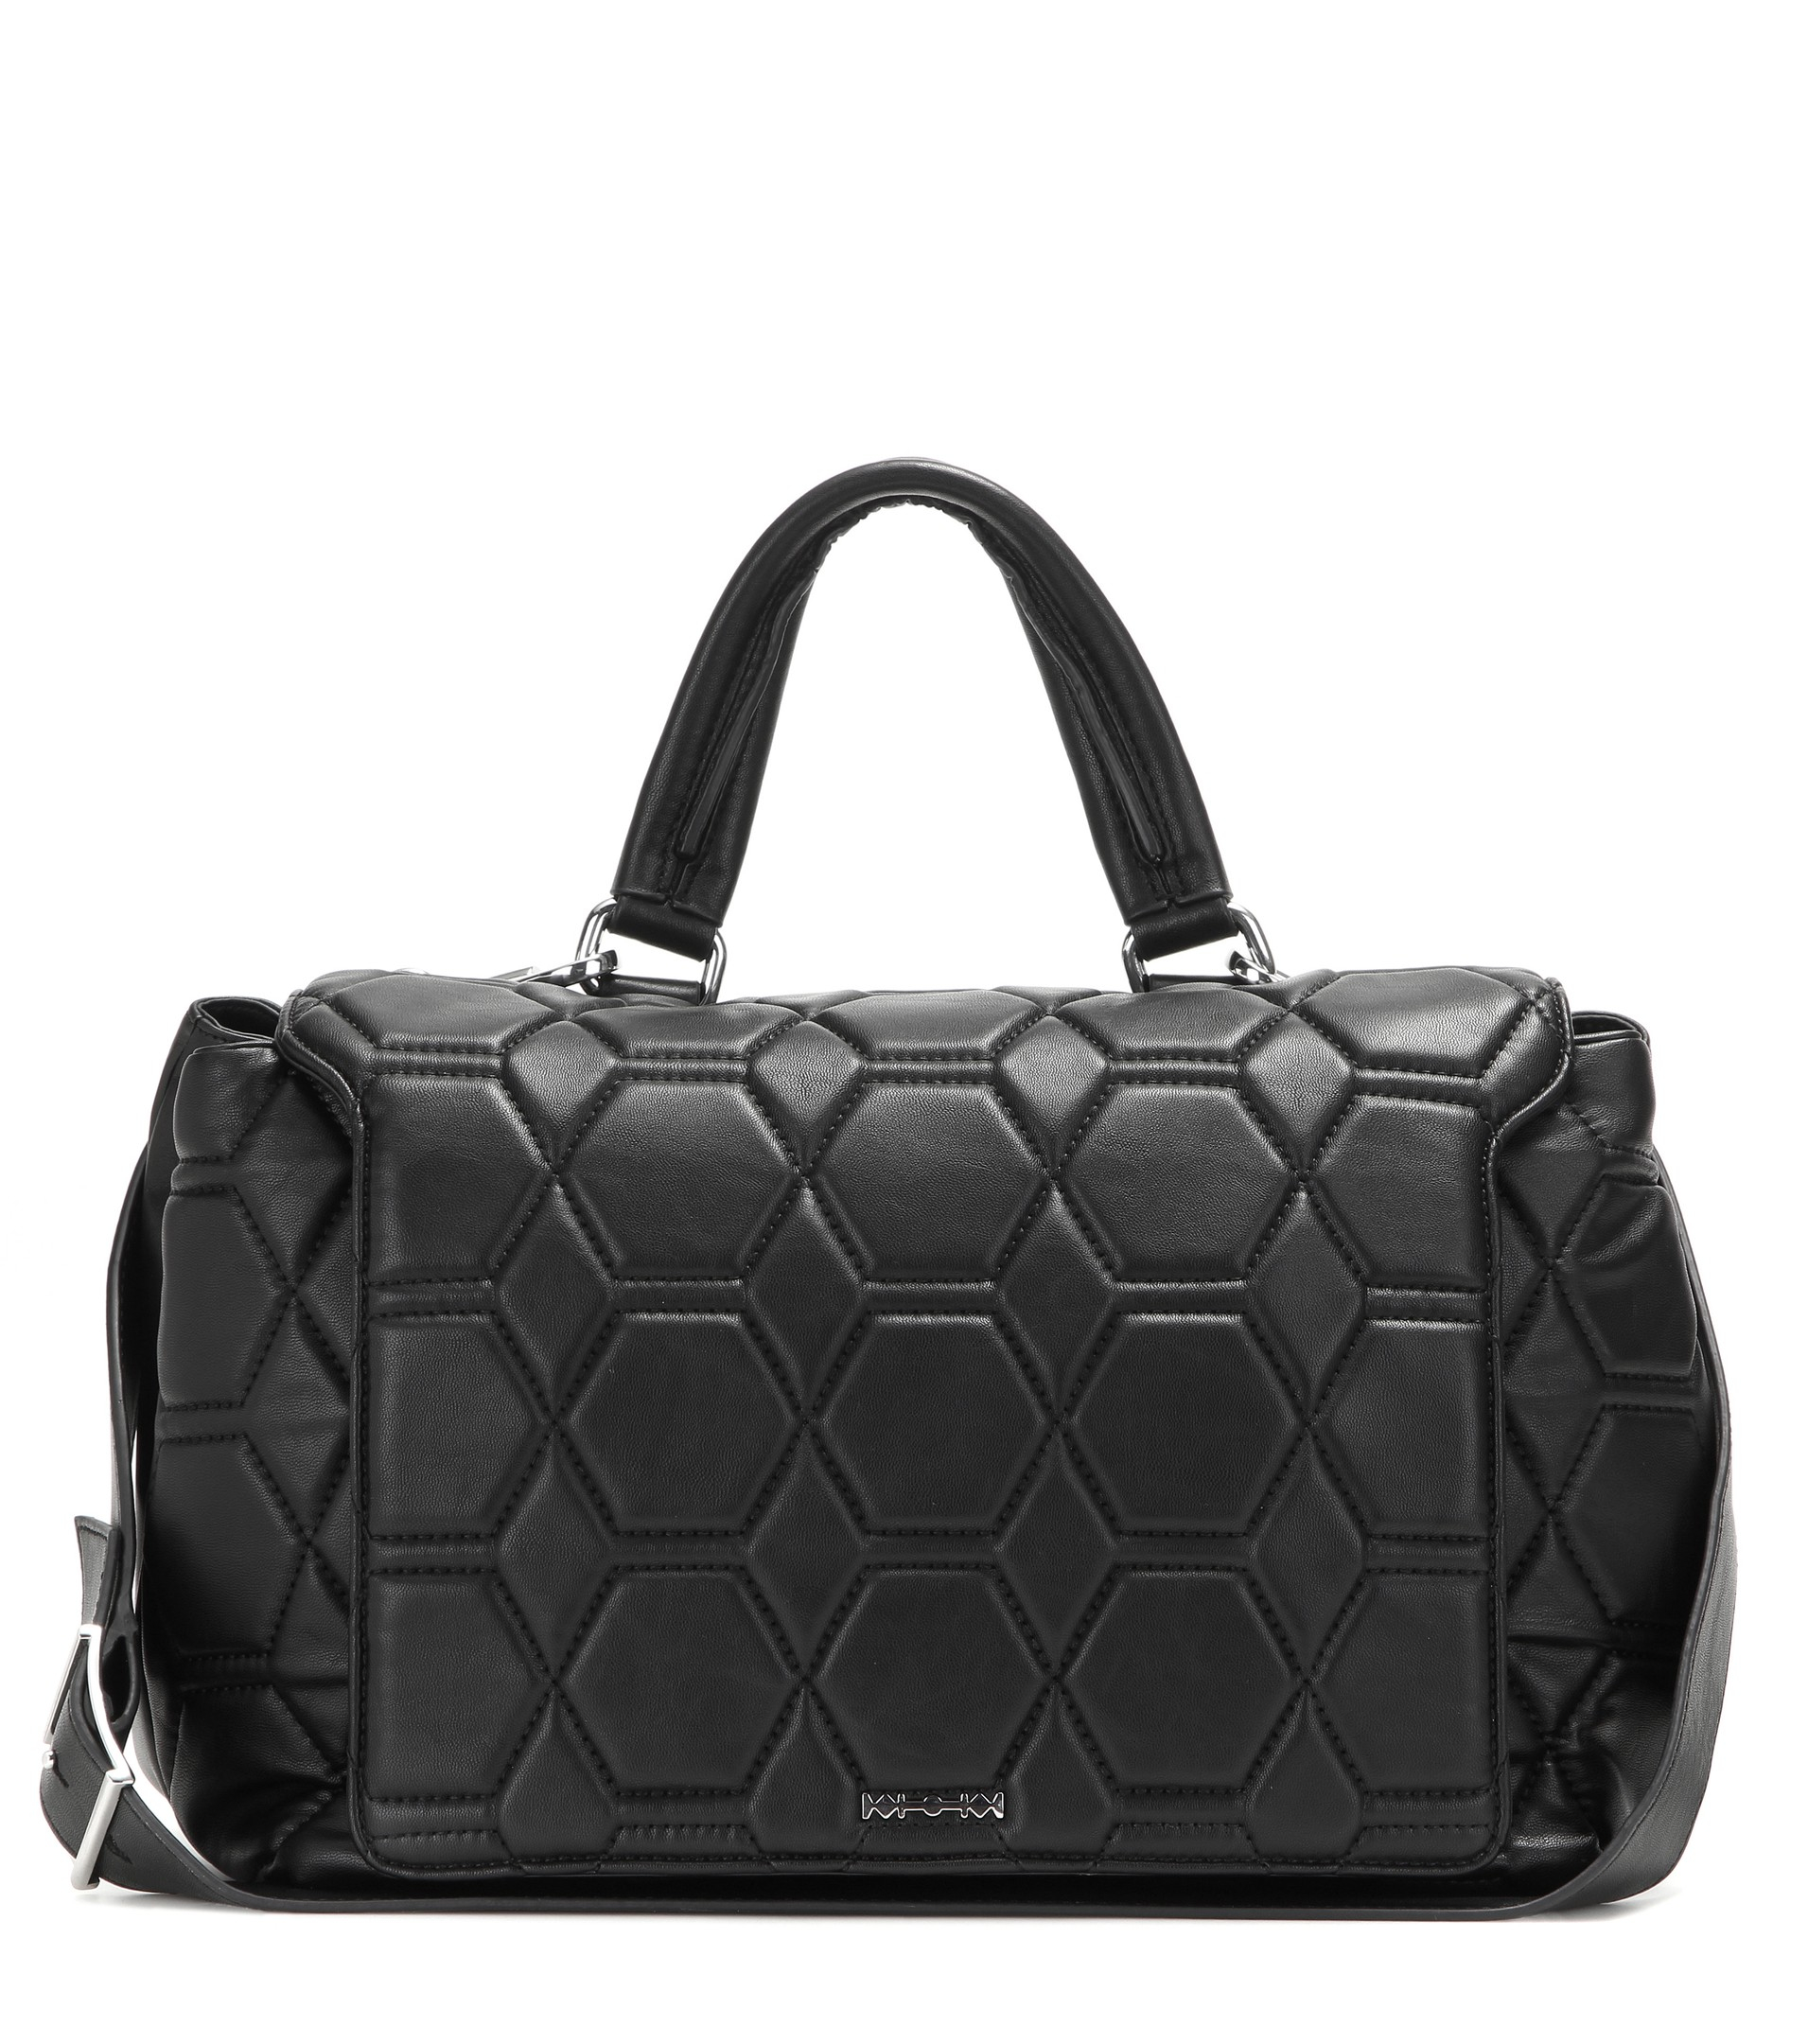 Lyst - McQ Quilted Leather Shoulder Bag in Black